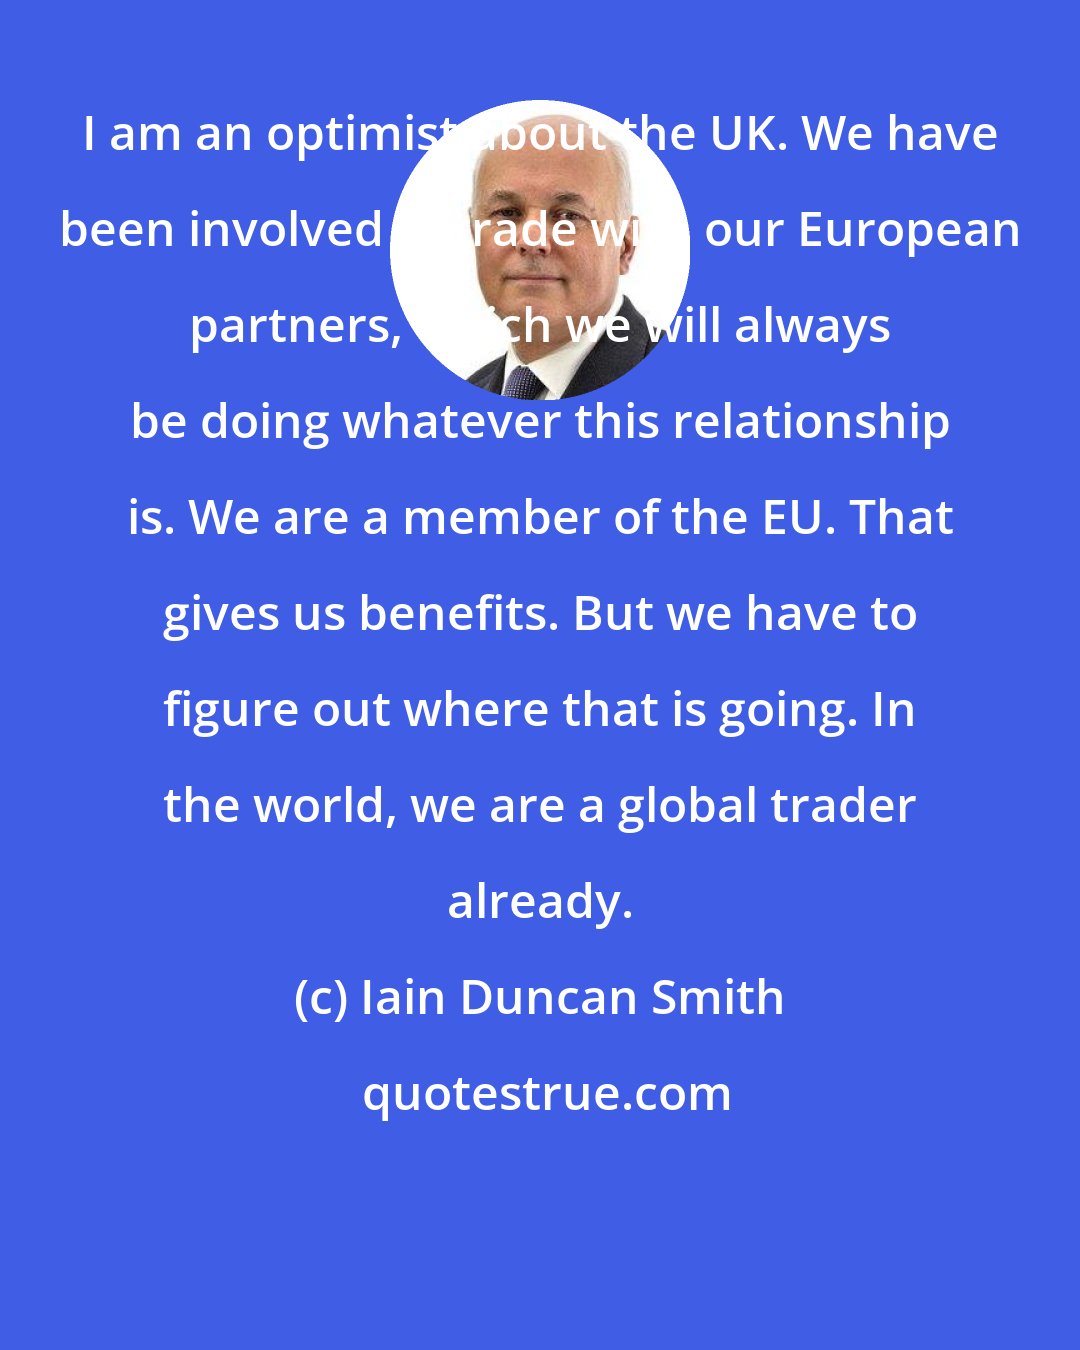 Iain Duncan Smith: I am an optimist about the UK. We have been involved in trade with our European partners, which we will always be doing whatever this relationship is. We are a member of the EU. That gives us benefits. But we have to figure out where that is going. In the world, we are a global trader already.